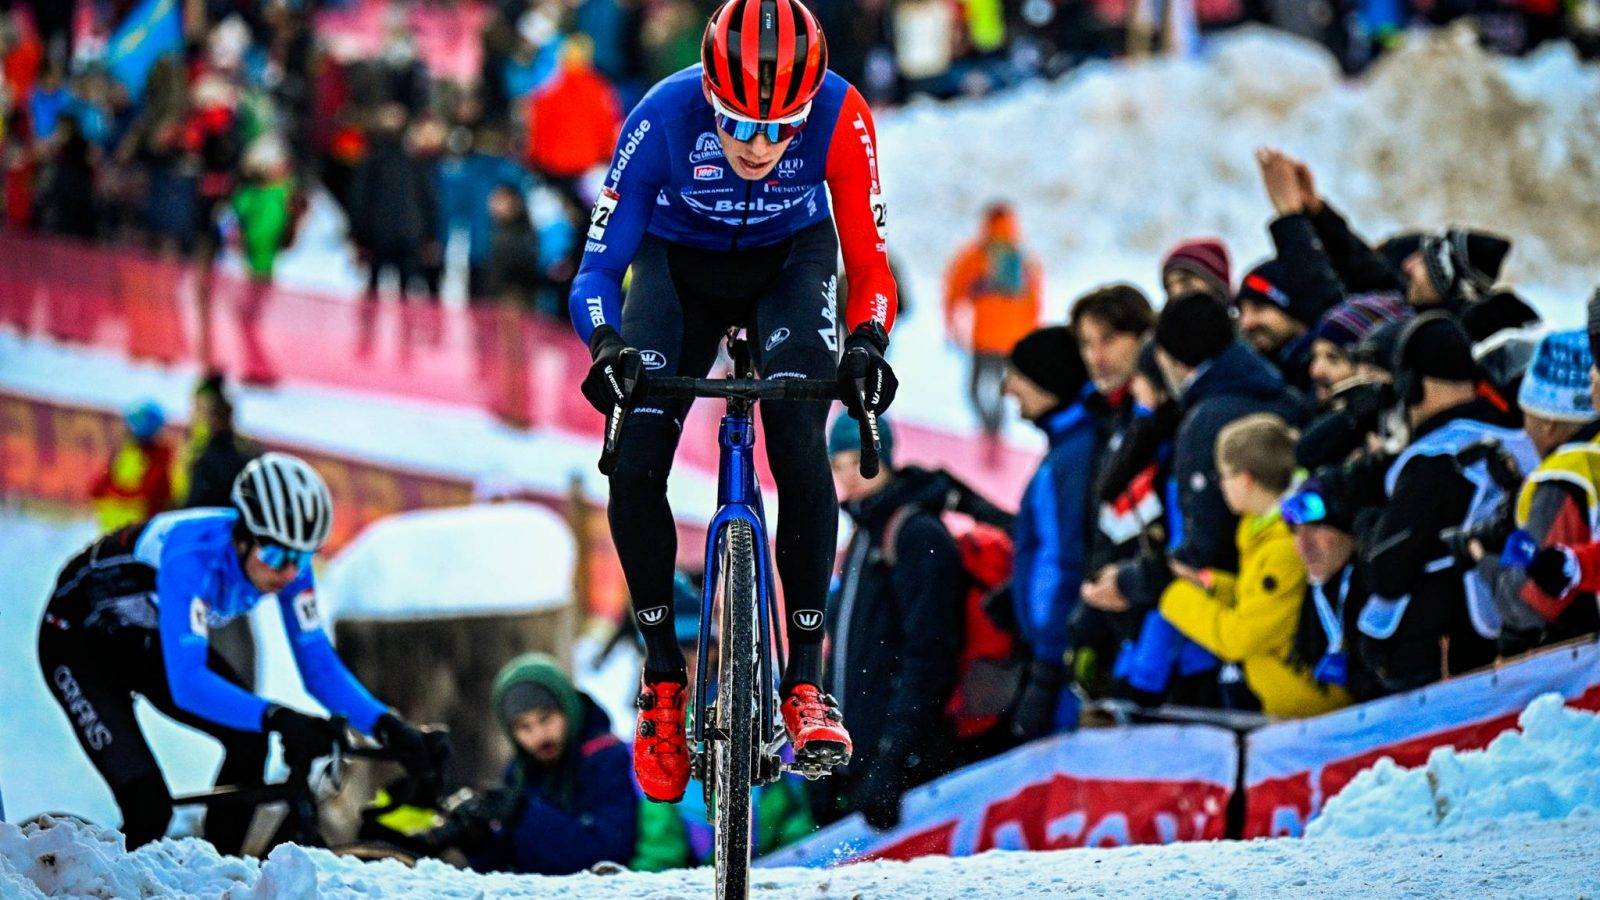 Dutch Pim Ronhaar pictured in action during the men's elite race of the Cyclocross World Cup race in Val di Sole, Italy, Saturday 17 December 2022, stage ten (out of 14) in the World Cup of the 2021-2022 season.
BELGA PHOTO JASPER JACOBS